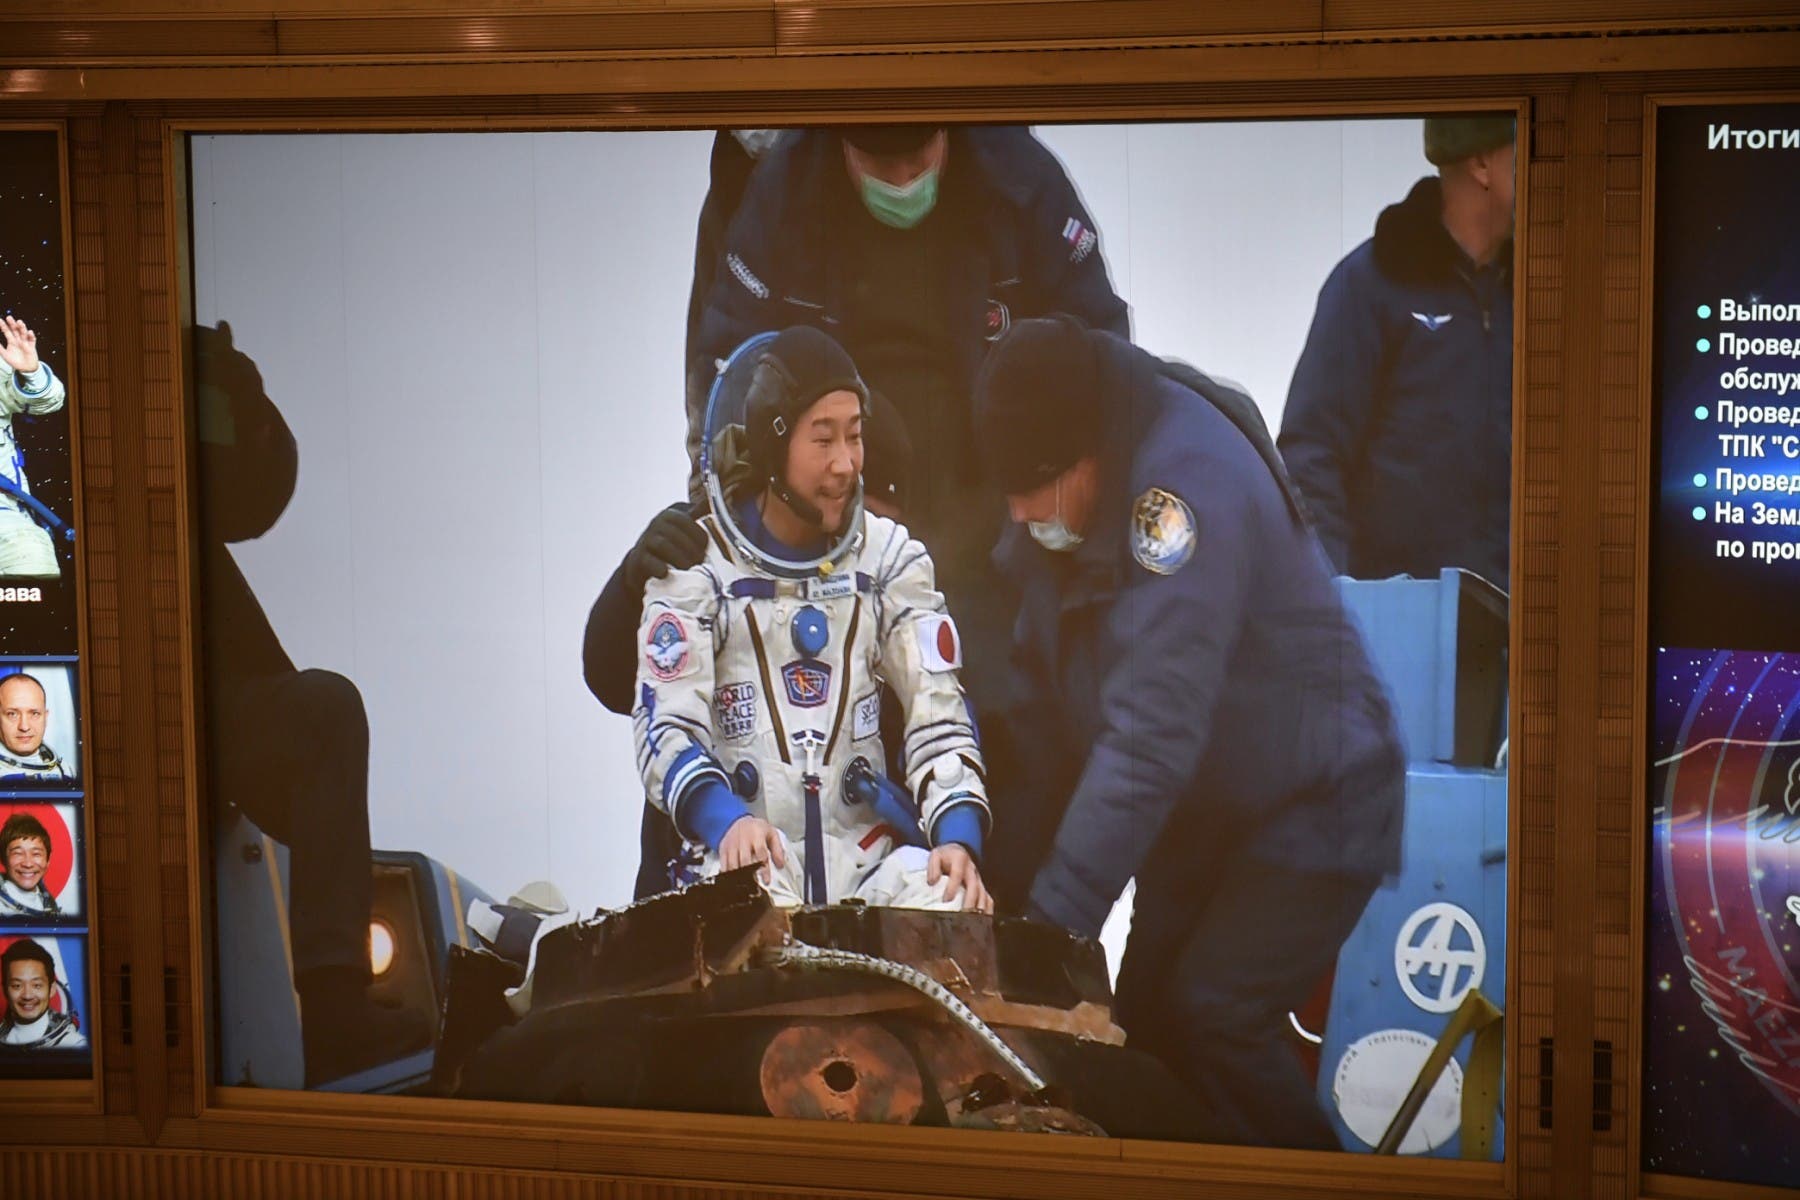 After returning from space, a Japanese billionaire: Earth is more precious